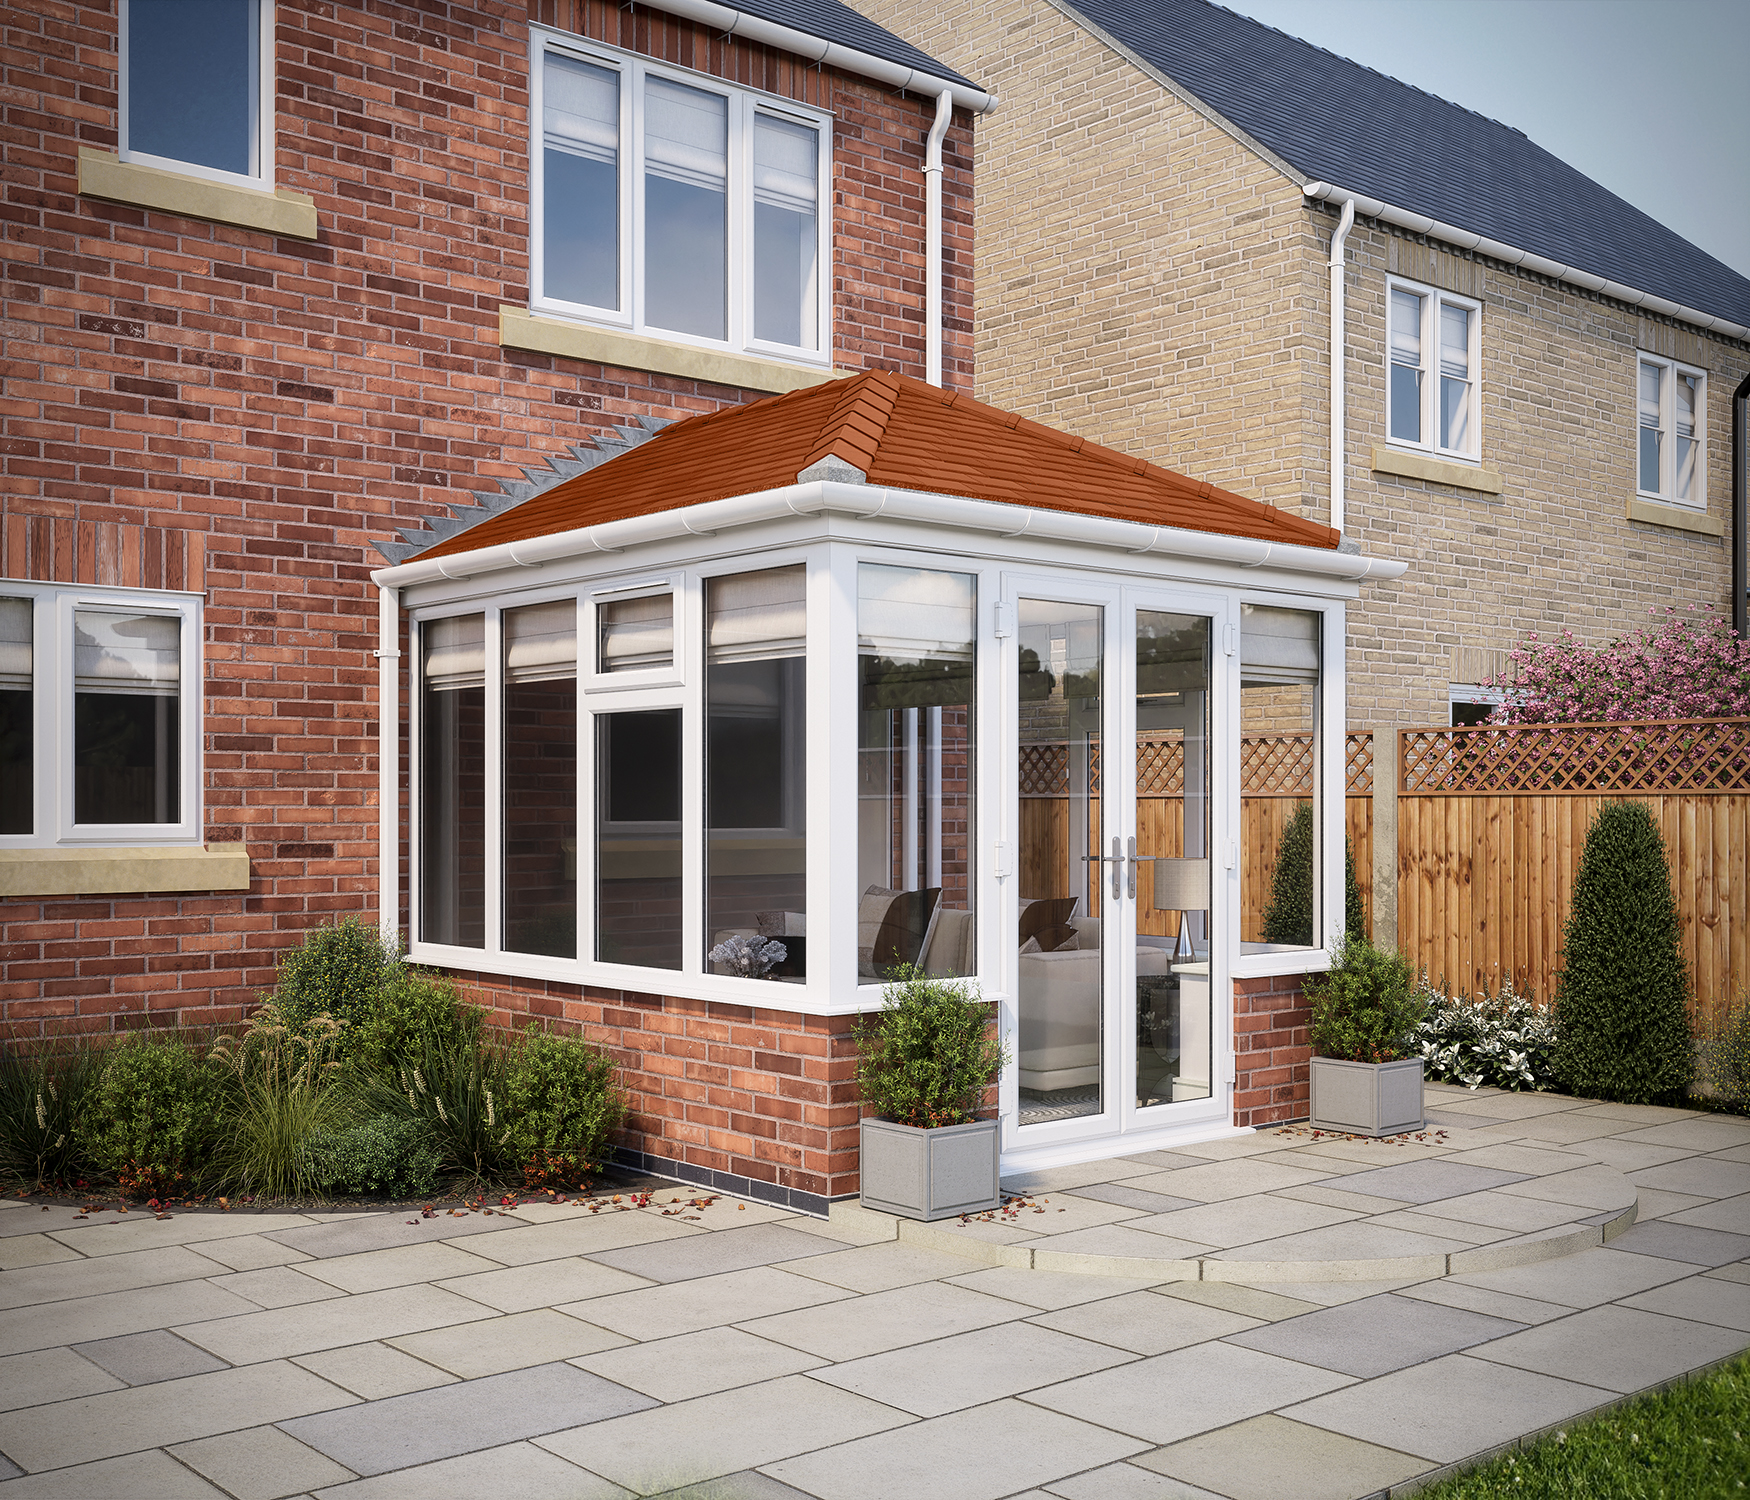 SOLid Roof Edwardian Conservatory White Frames Dwarf Wall with Rustic Terracotta Tiles - 13 x 10ft